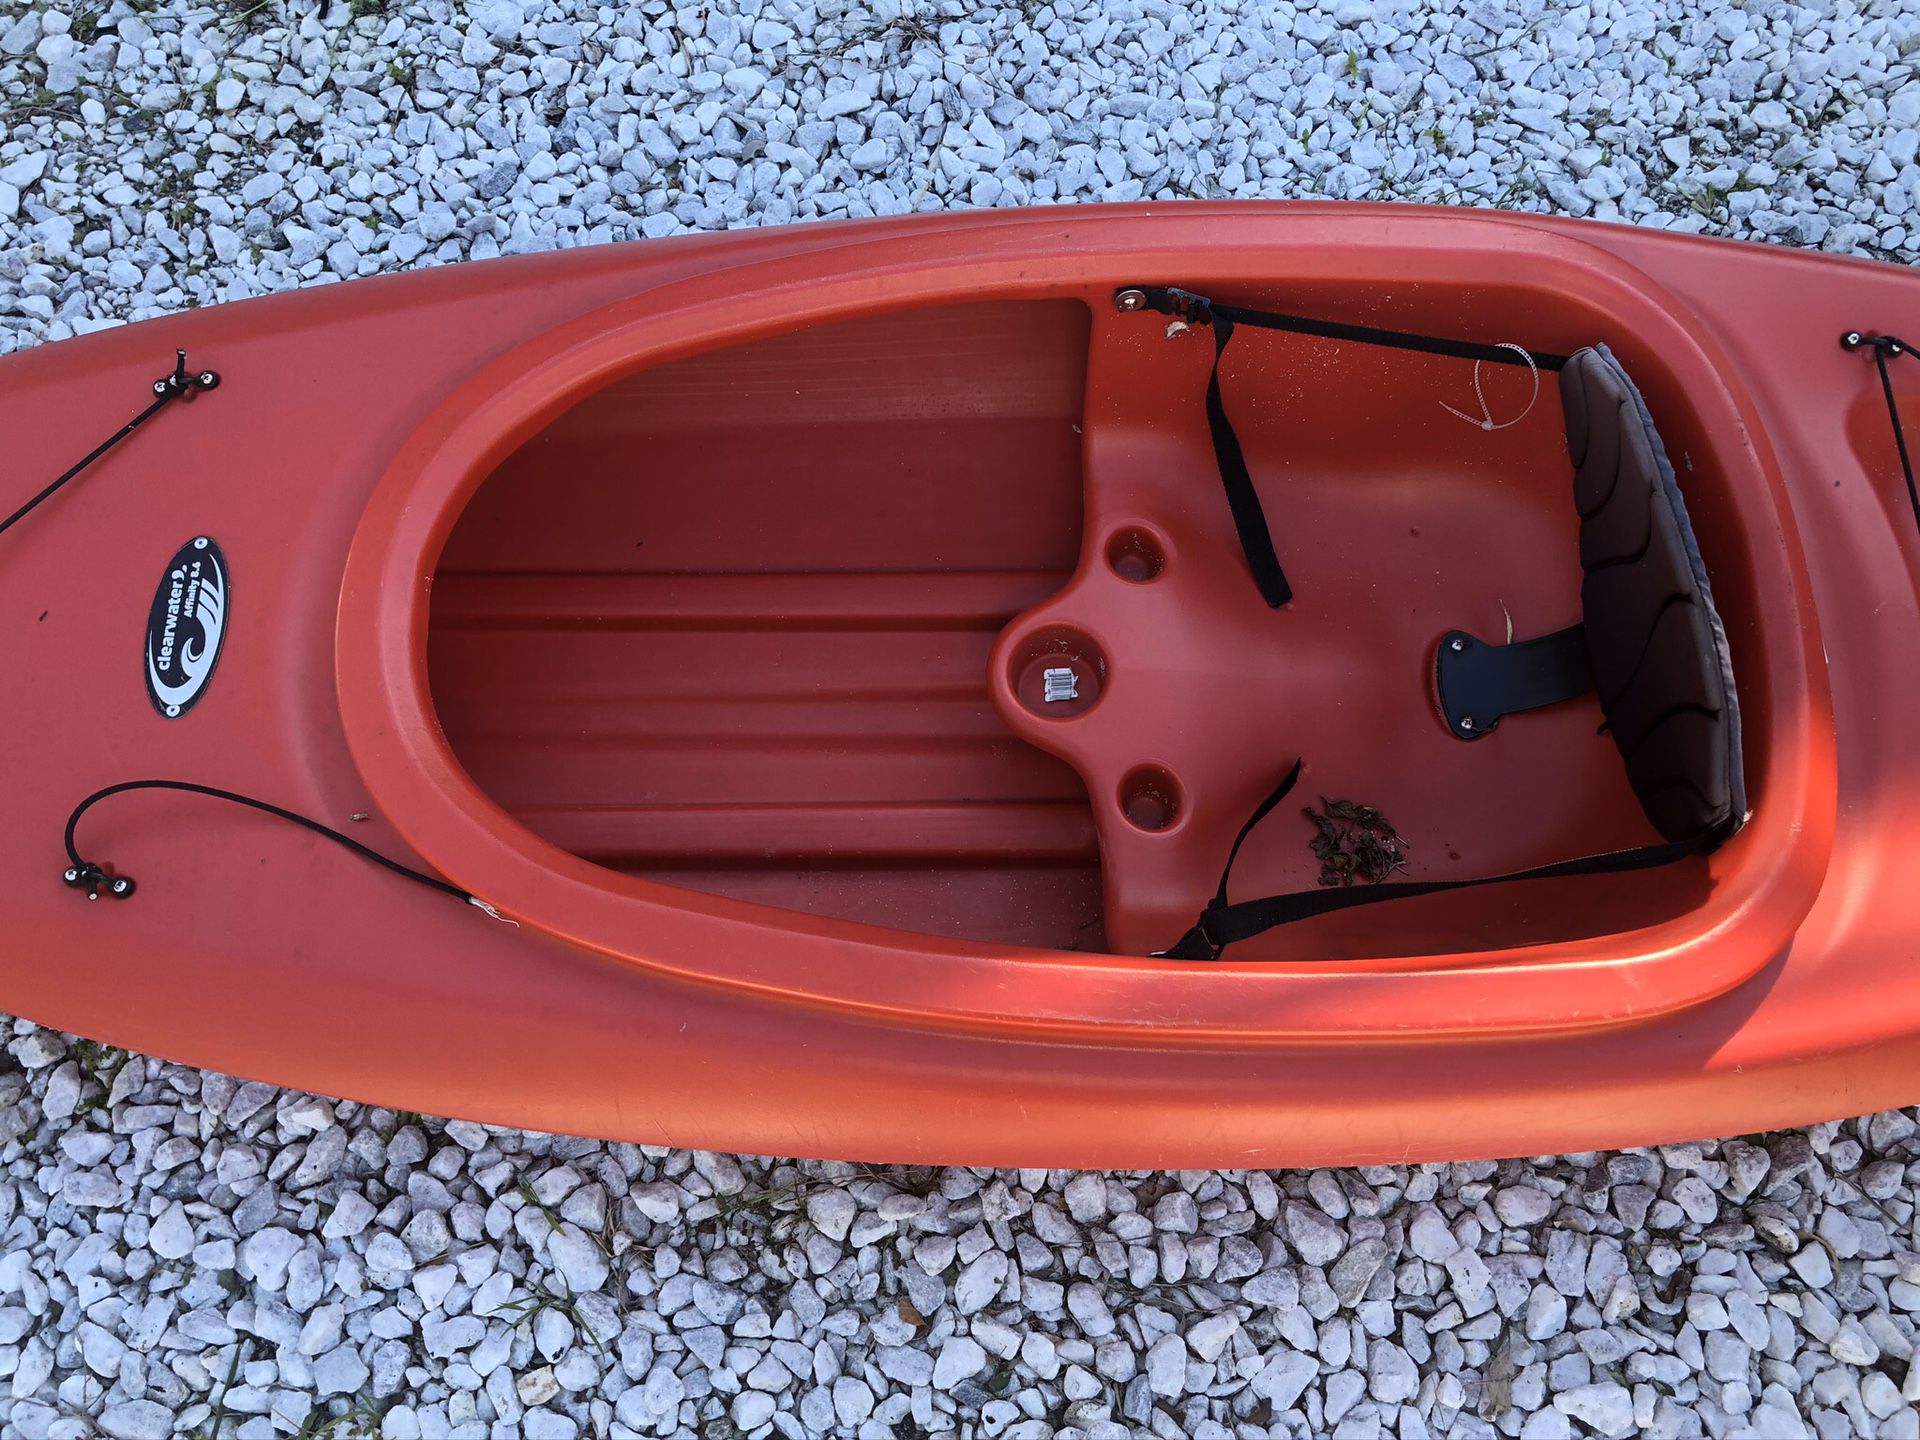 Clearwater kayak used twice